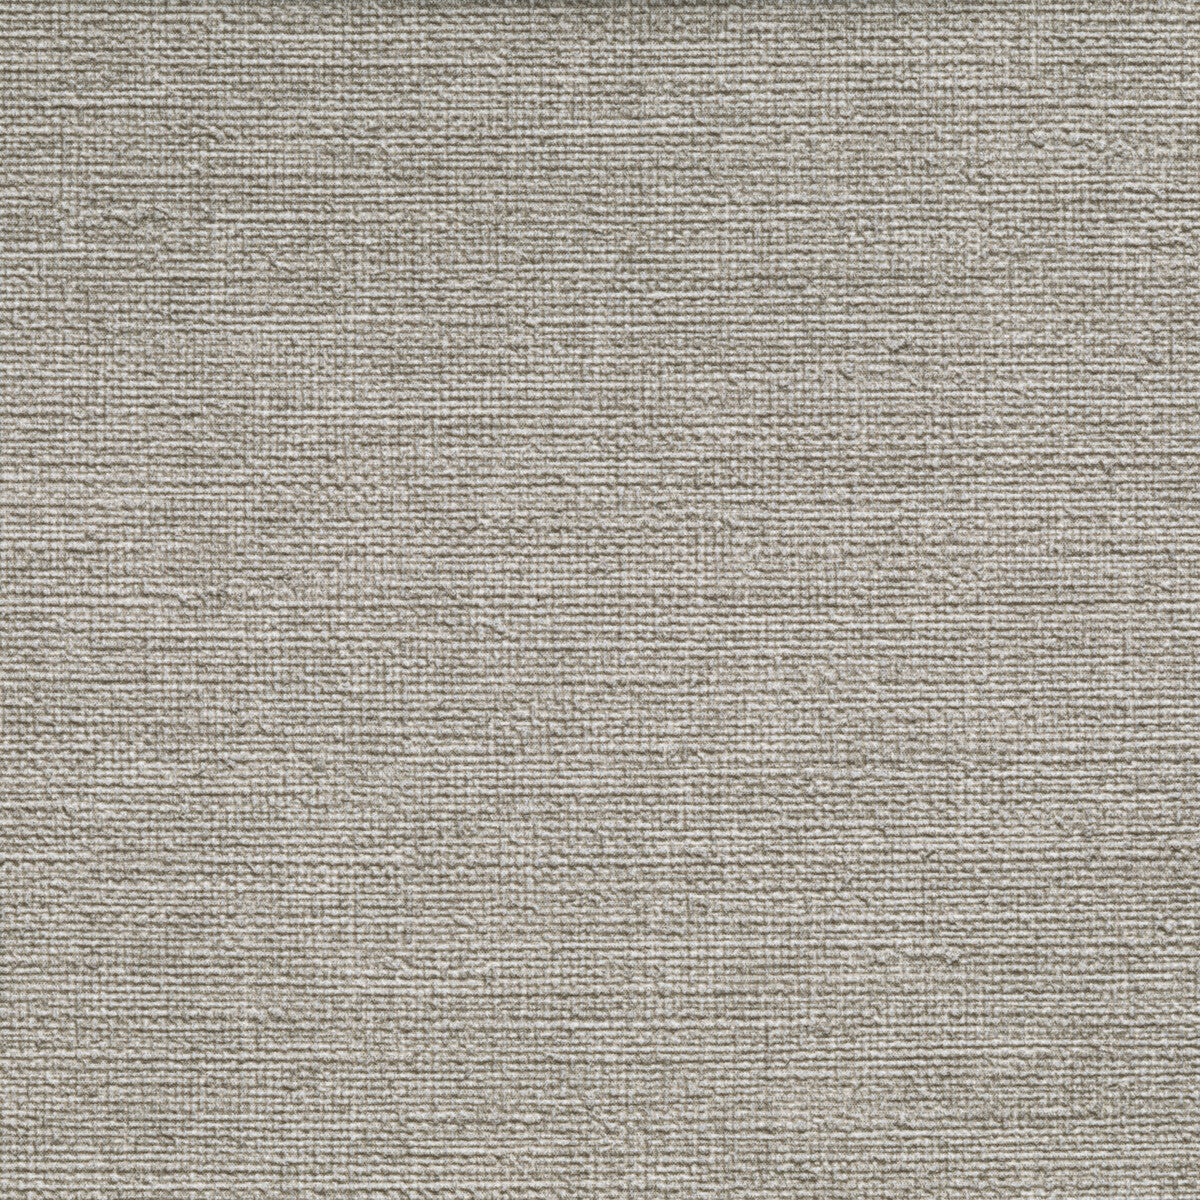 Caslin fabric in storm color - pattern CASLIN.121.0 - by Kravet Contract in the Foundations / Value collection